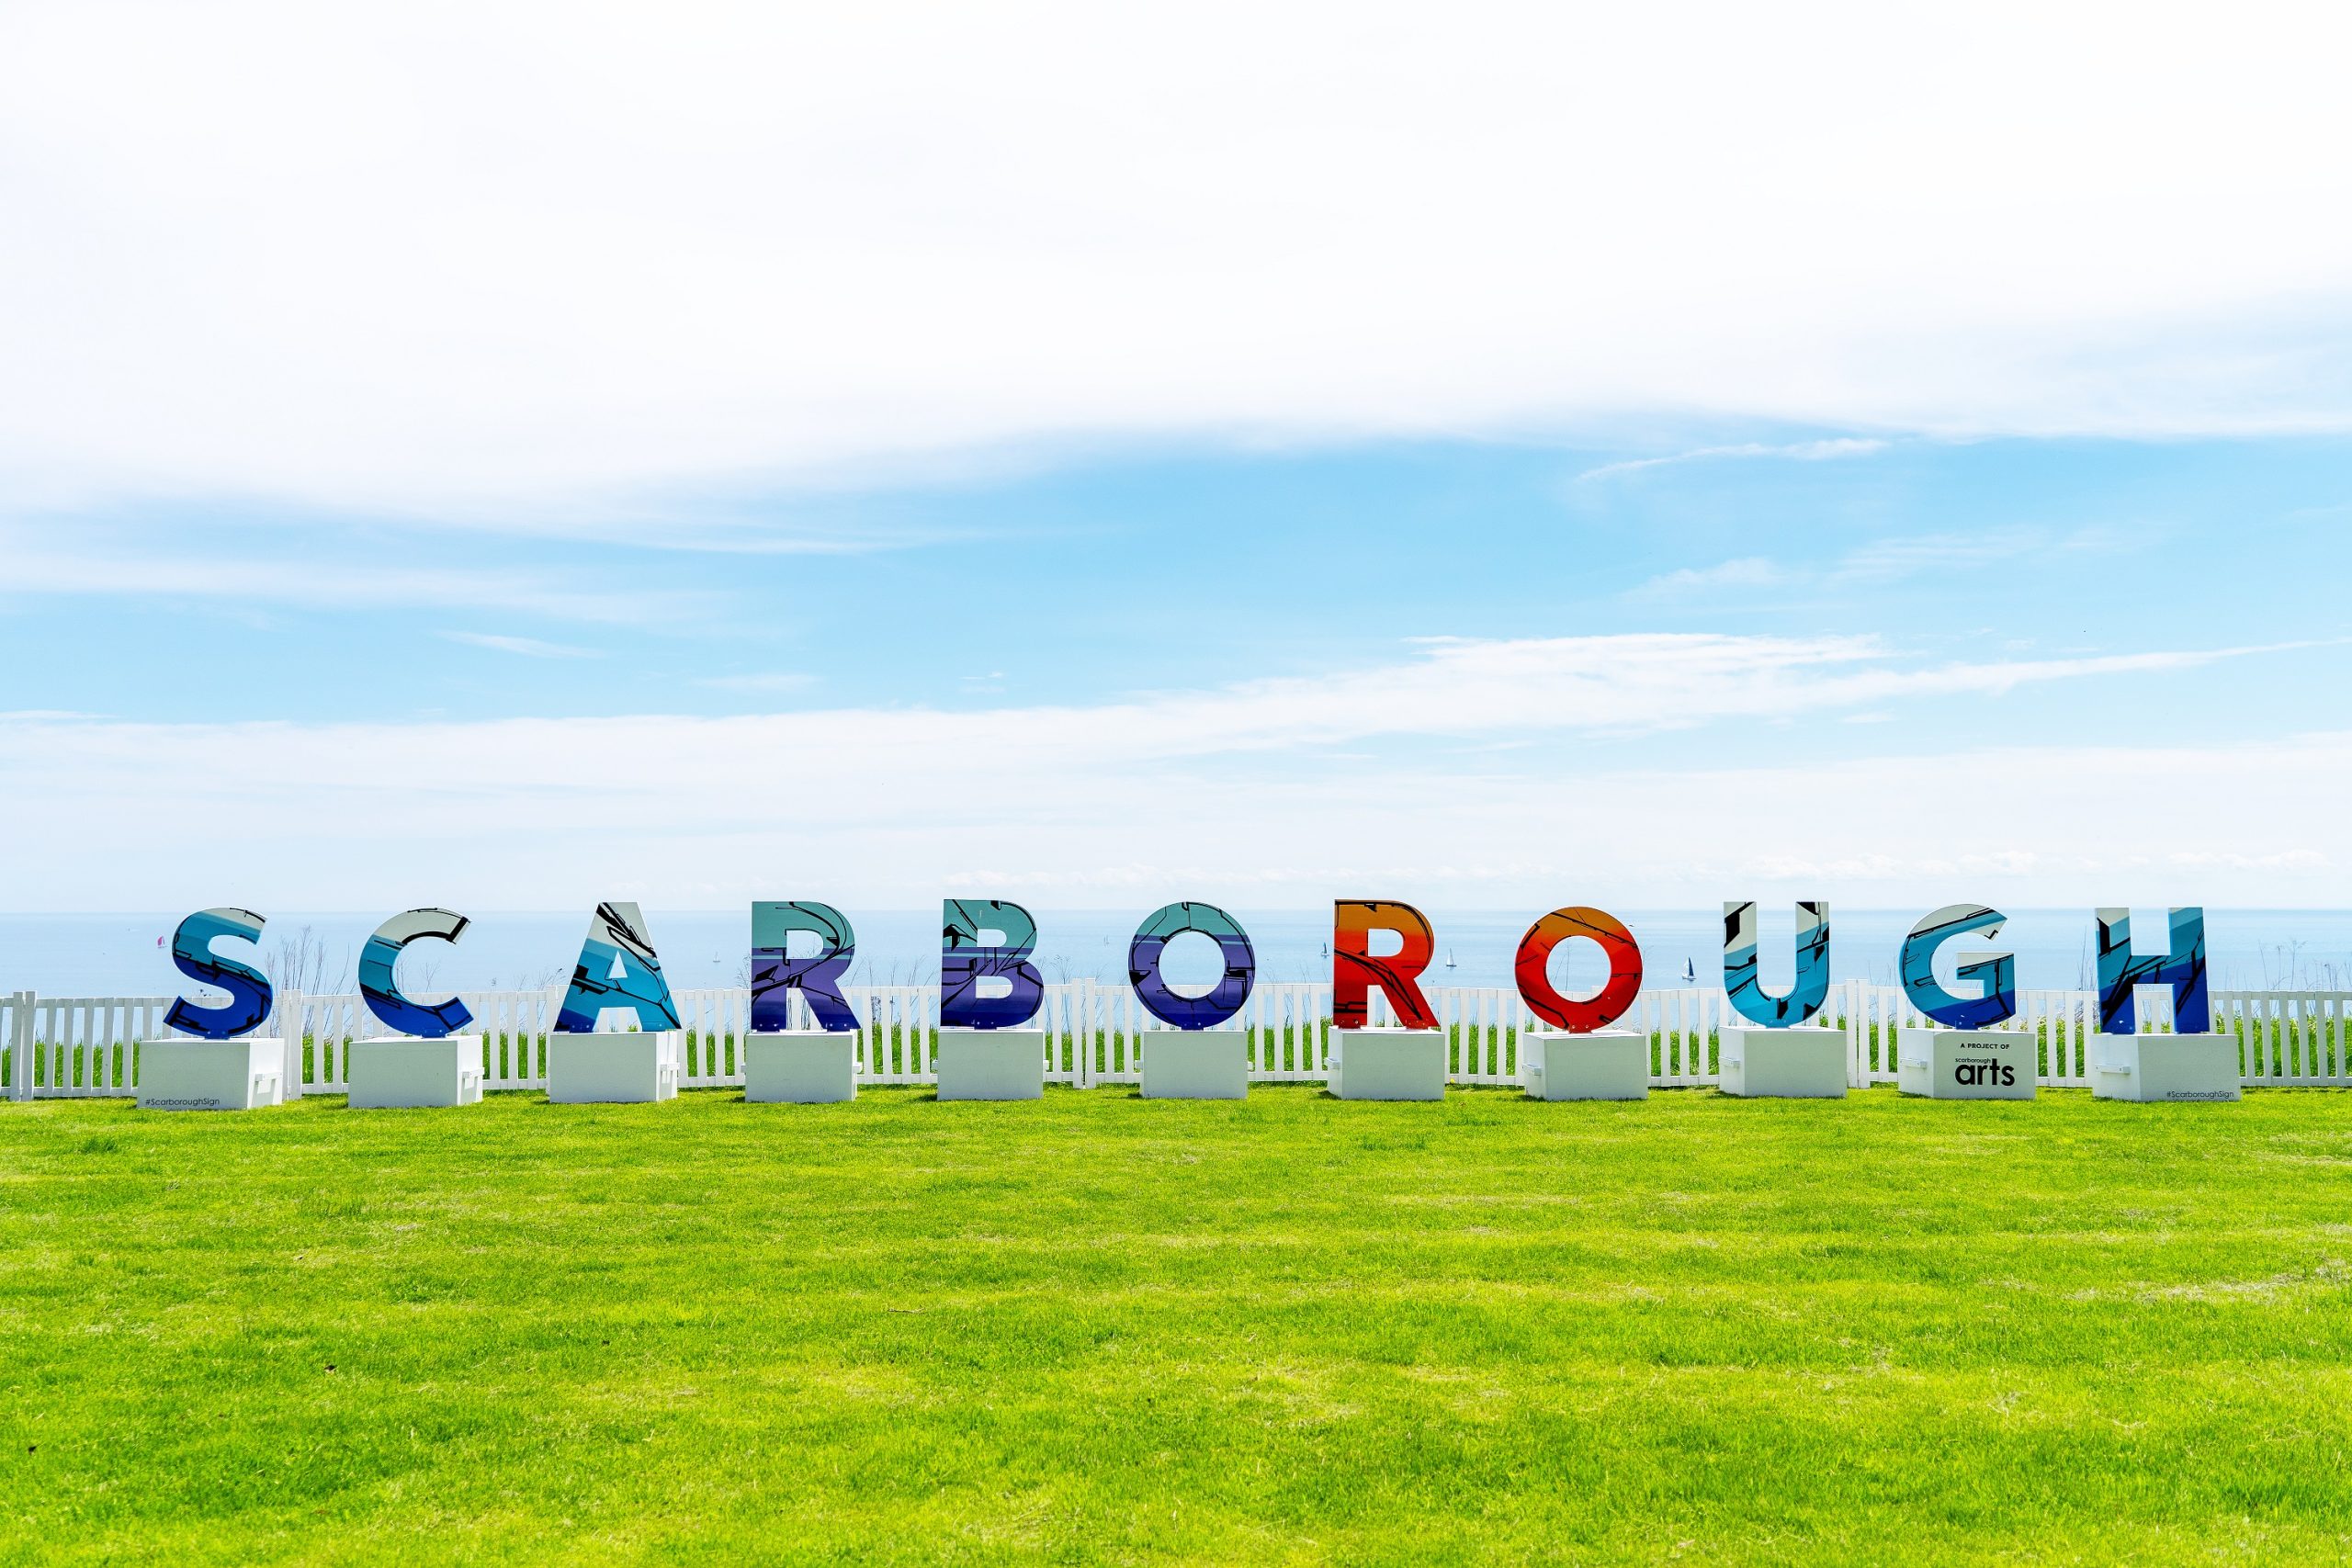 Large outdoor installation of letters spelling out Scarborough